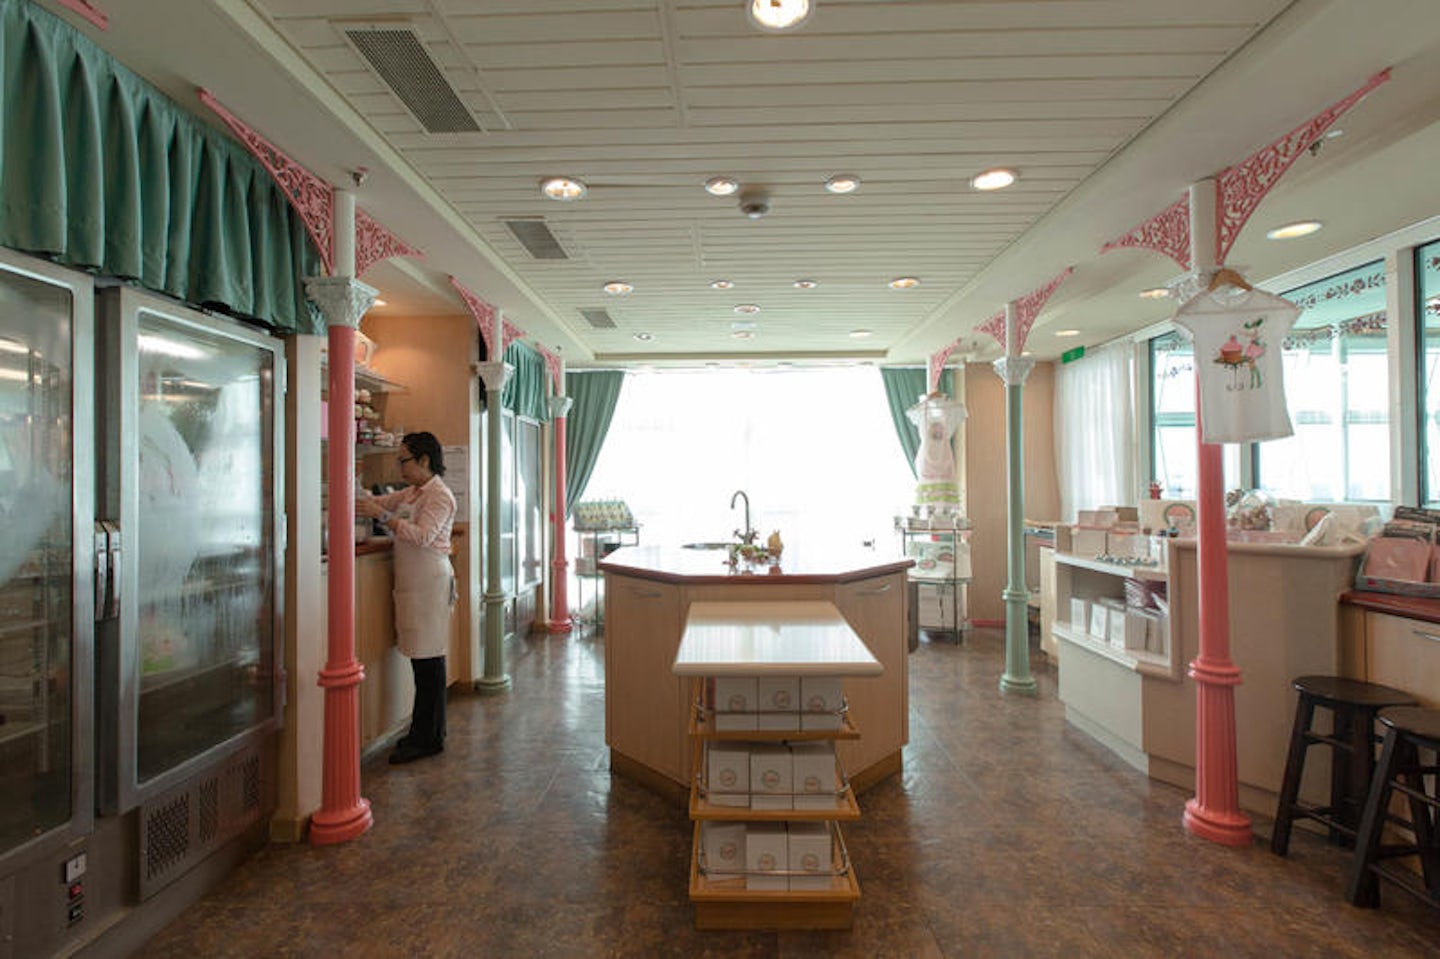 The Cupcake Cupboard and Classes on Voyager of the Seas